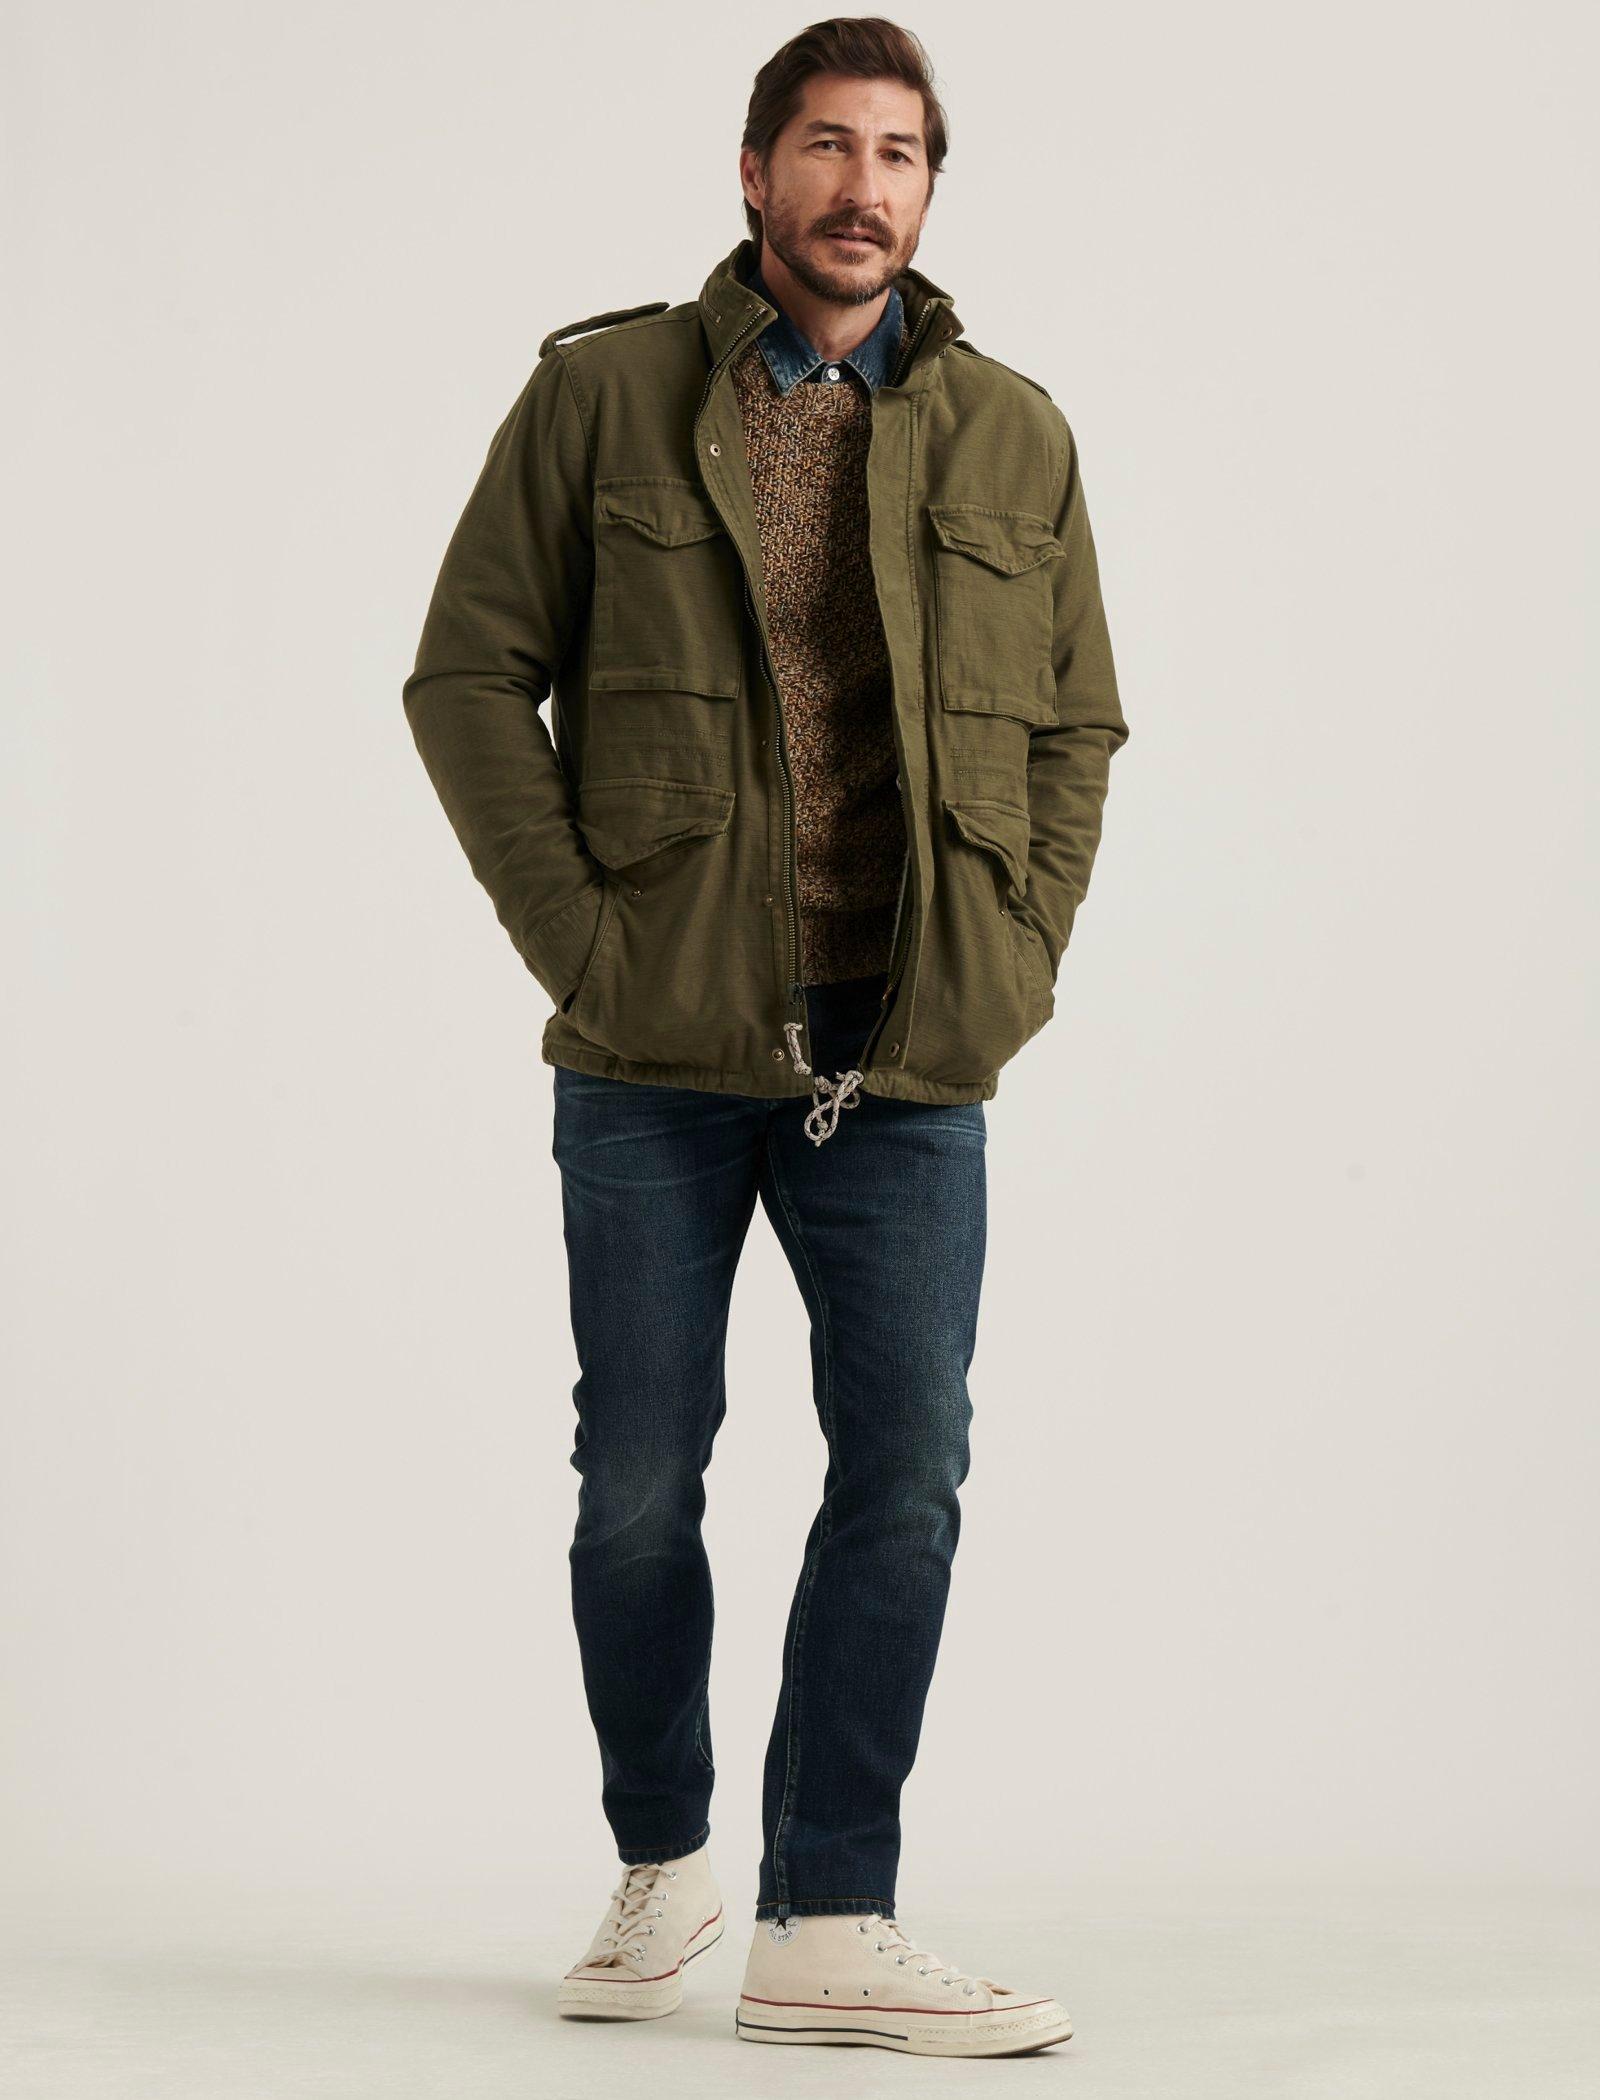 Jackets for Men | Buy One, Get One 50% Off Denim | Lucky Brand